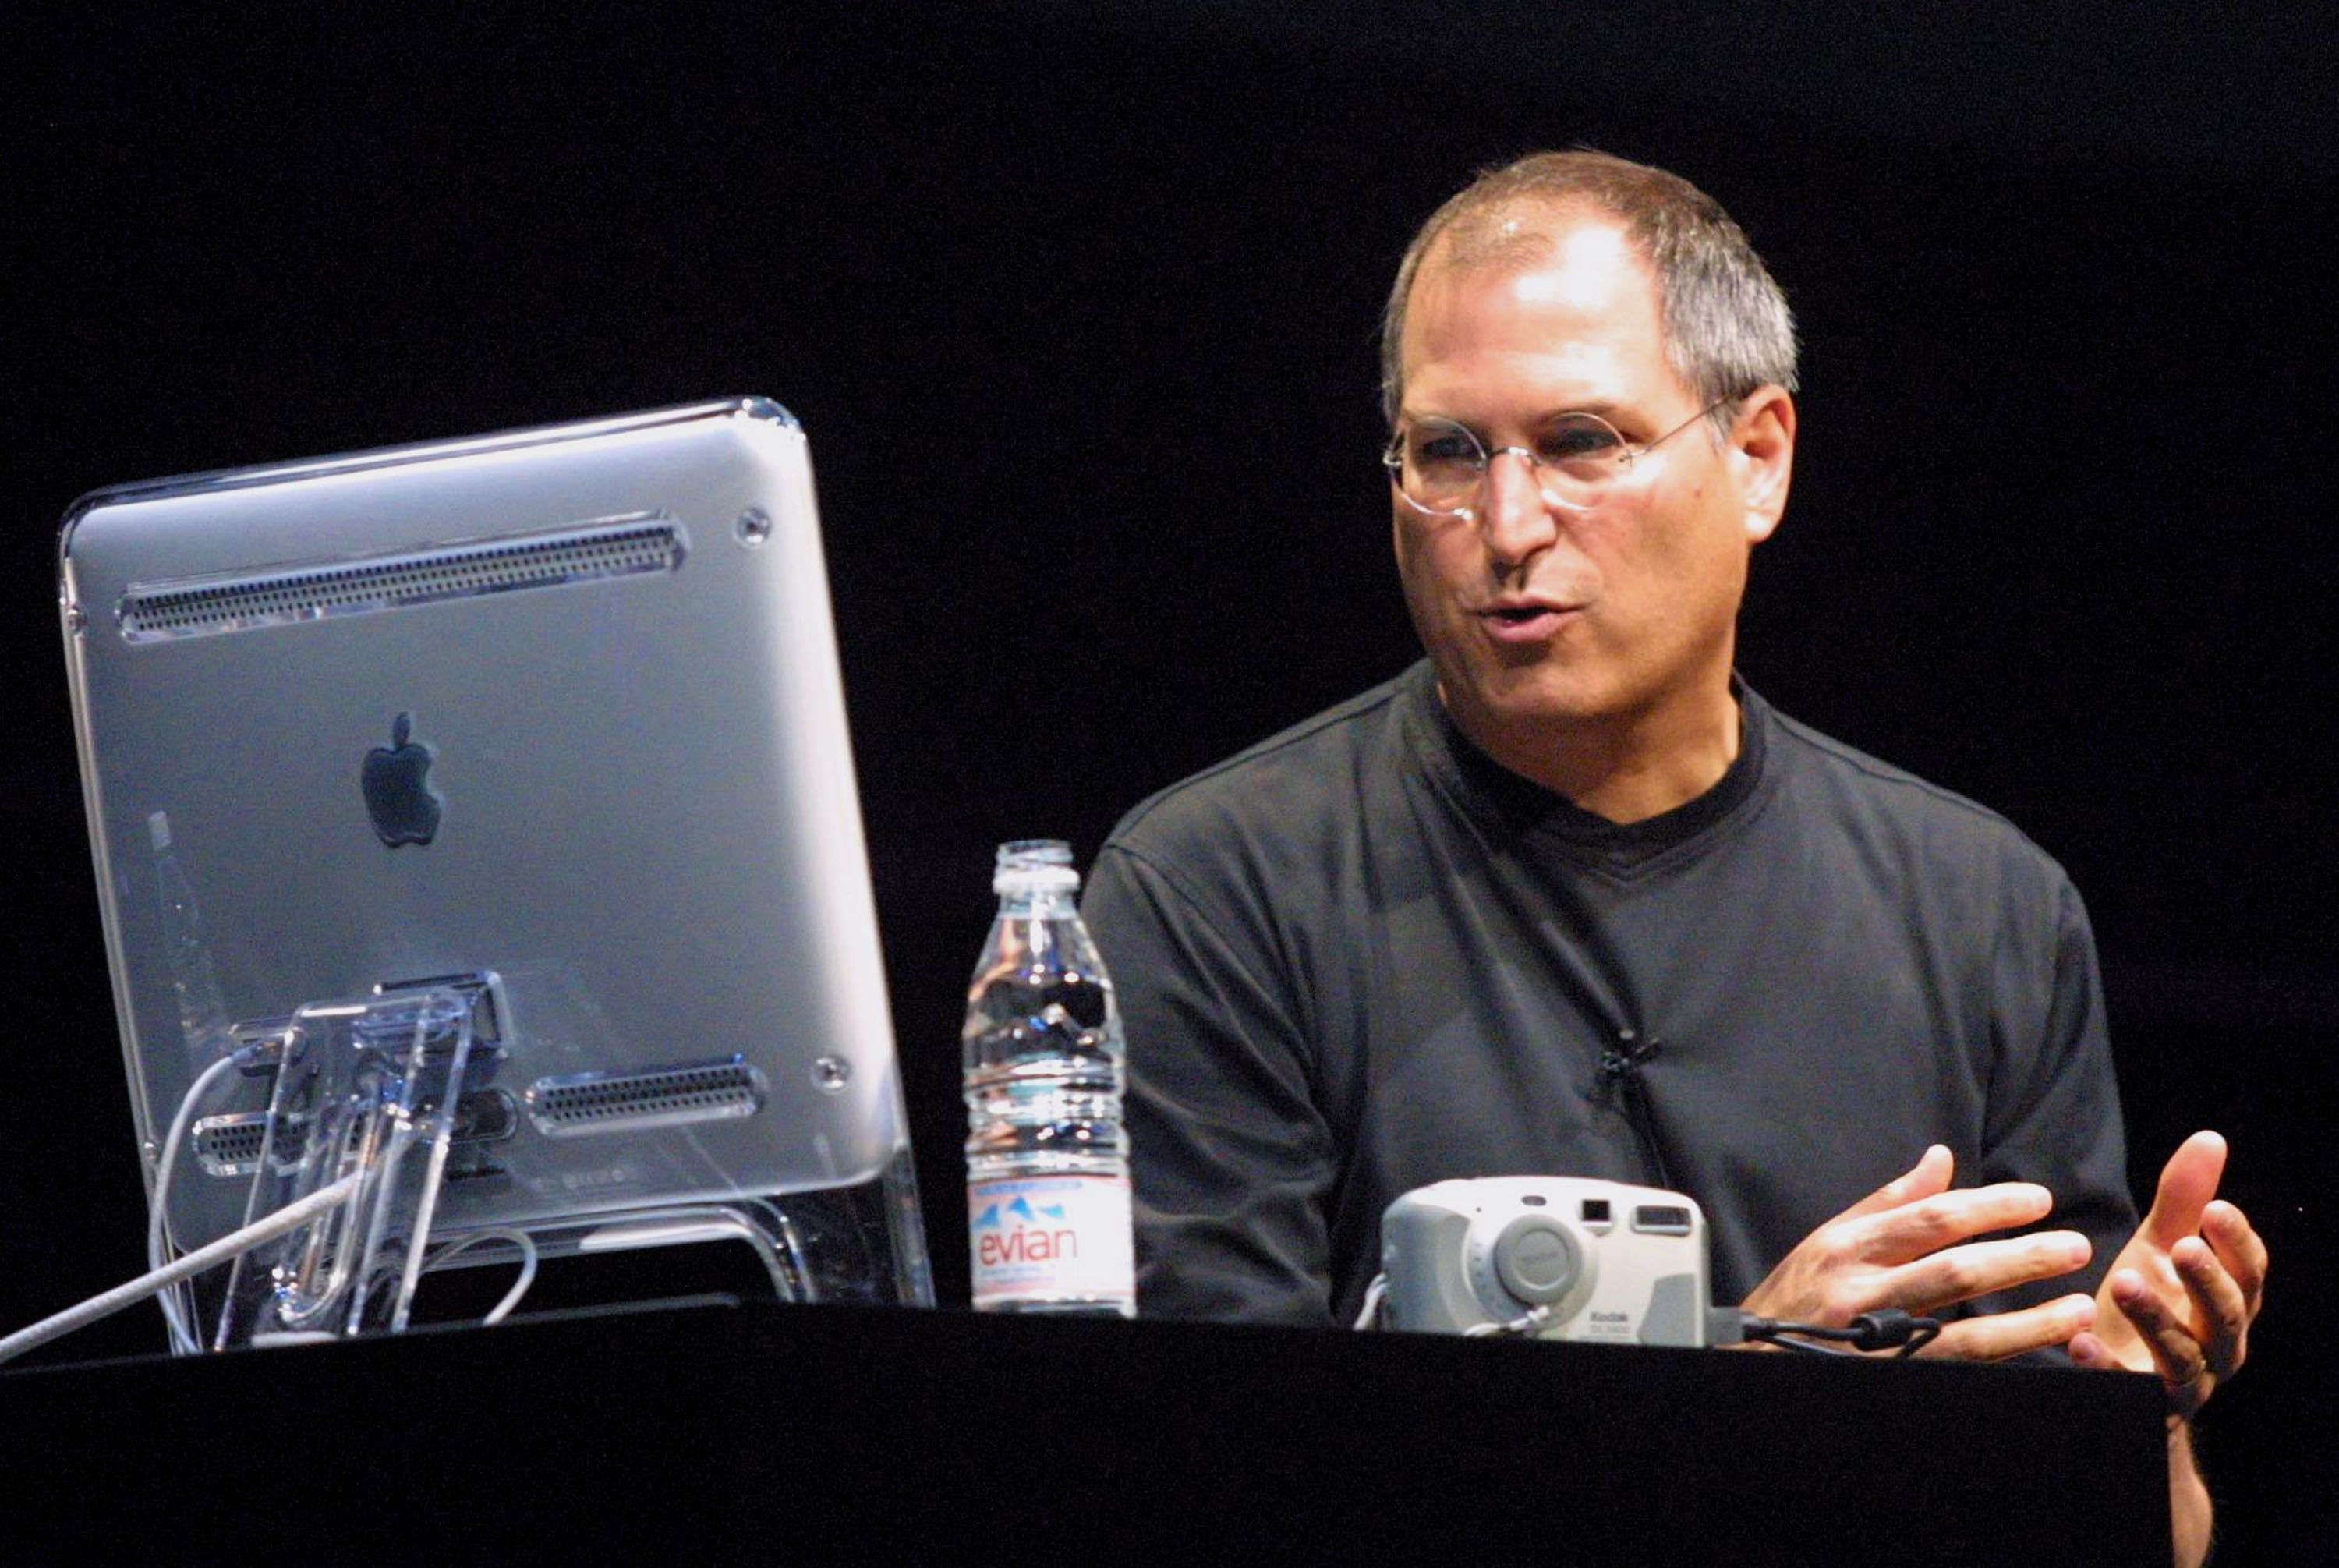 392079 07: Steve Jobs, CEO of Apple computers, delivers the keynote address at the Macworld Conference and Expo July 18, 2001 in New York City. (Photo by Mario Tama/Getty Images)